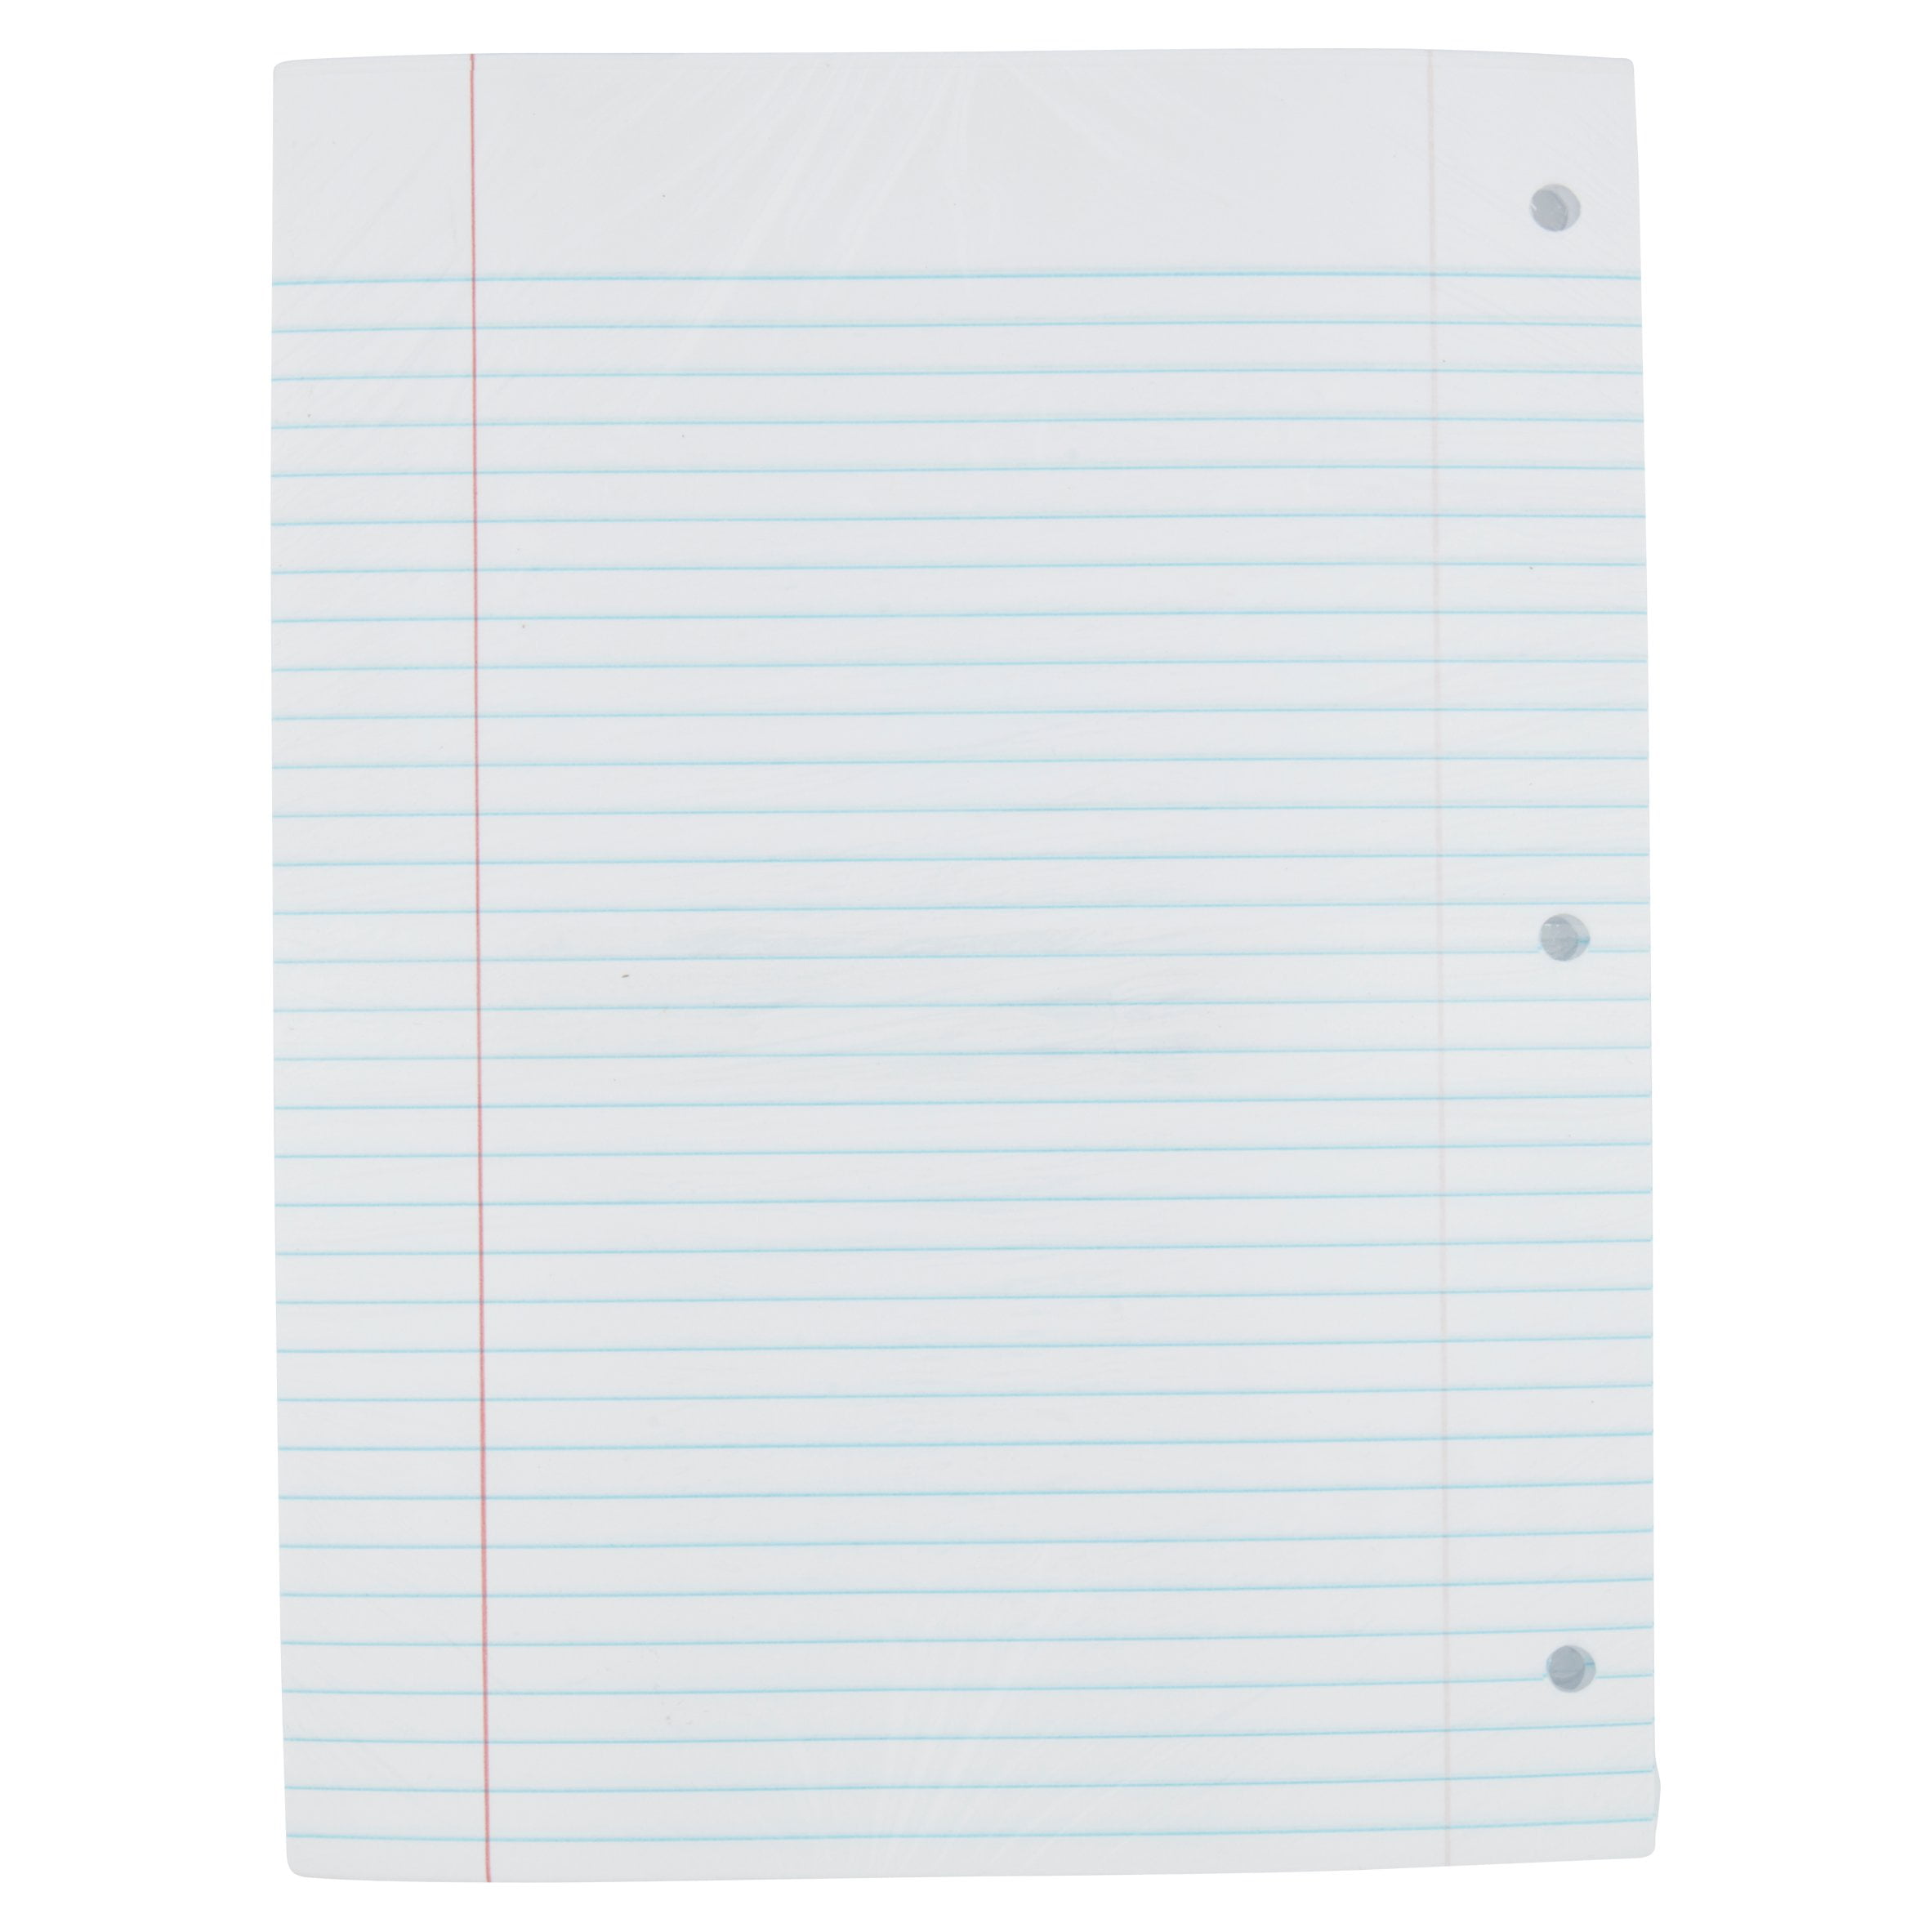 Filler Paper 3H White 20 lb 5 1/2 x 8 1/2 Pack of 100 Sheets College Rule 